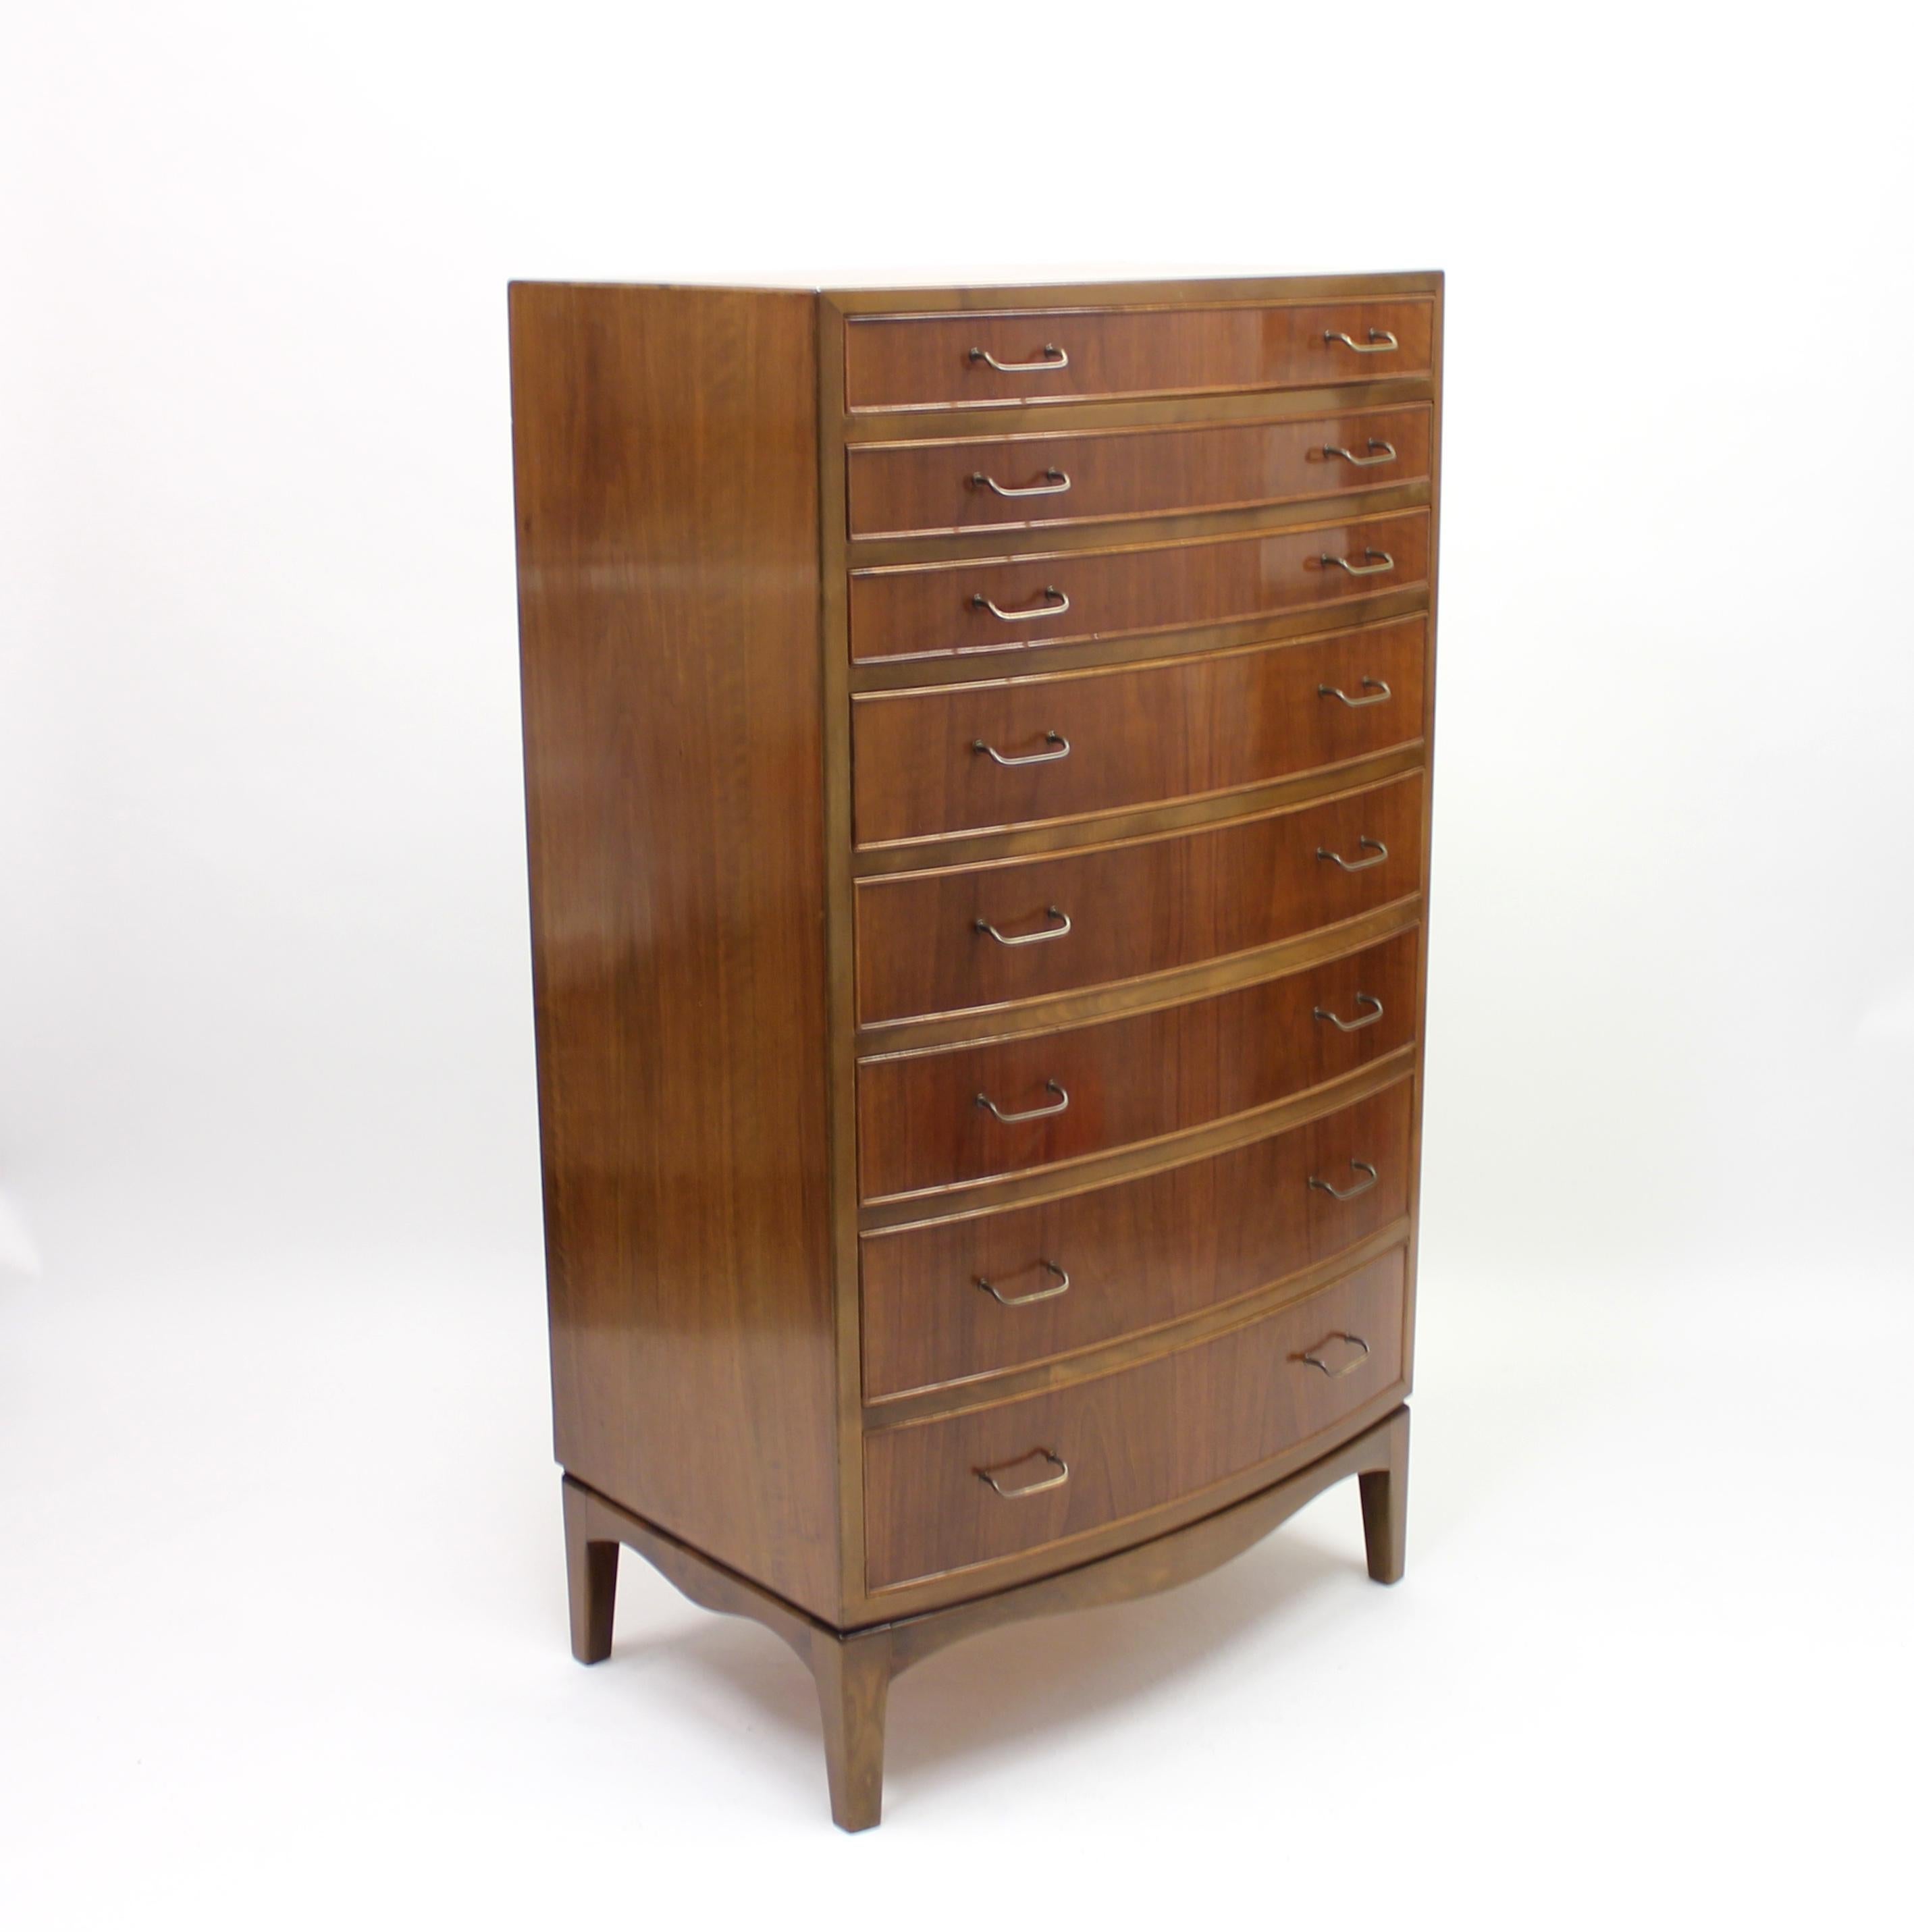 Mid-20th Century Chest of Drawers by Ole Wanscher for A.J. Iversen, 1940s For Sale